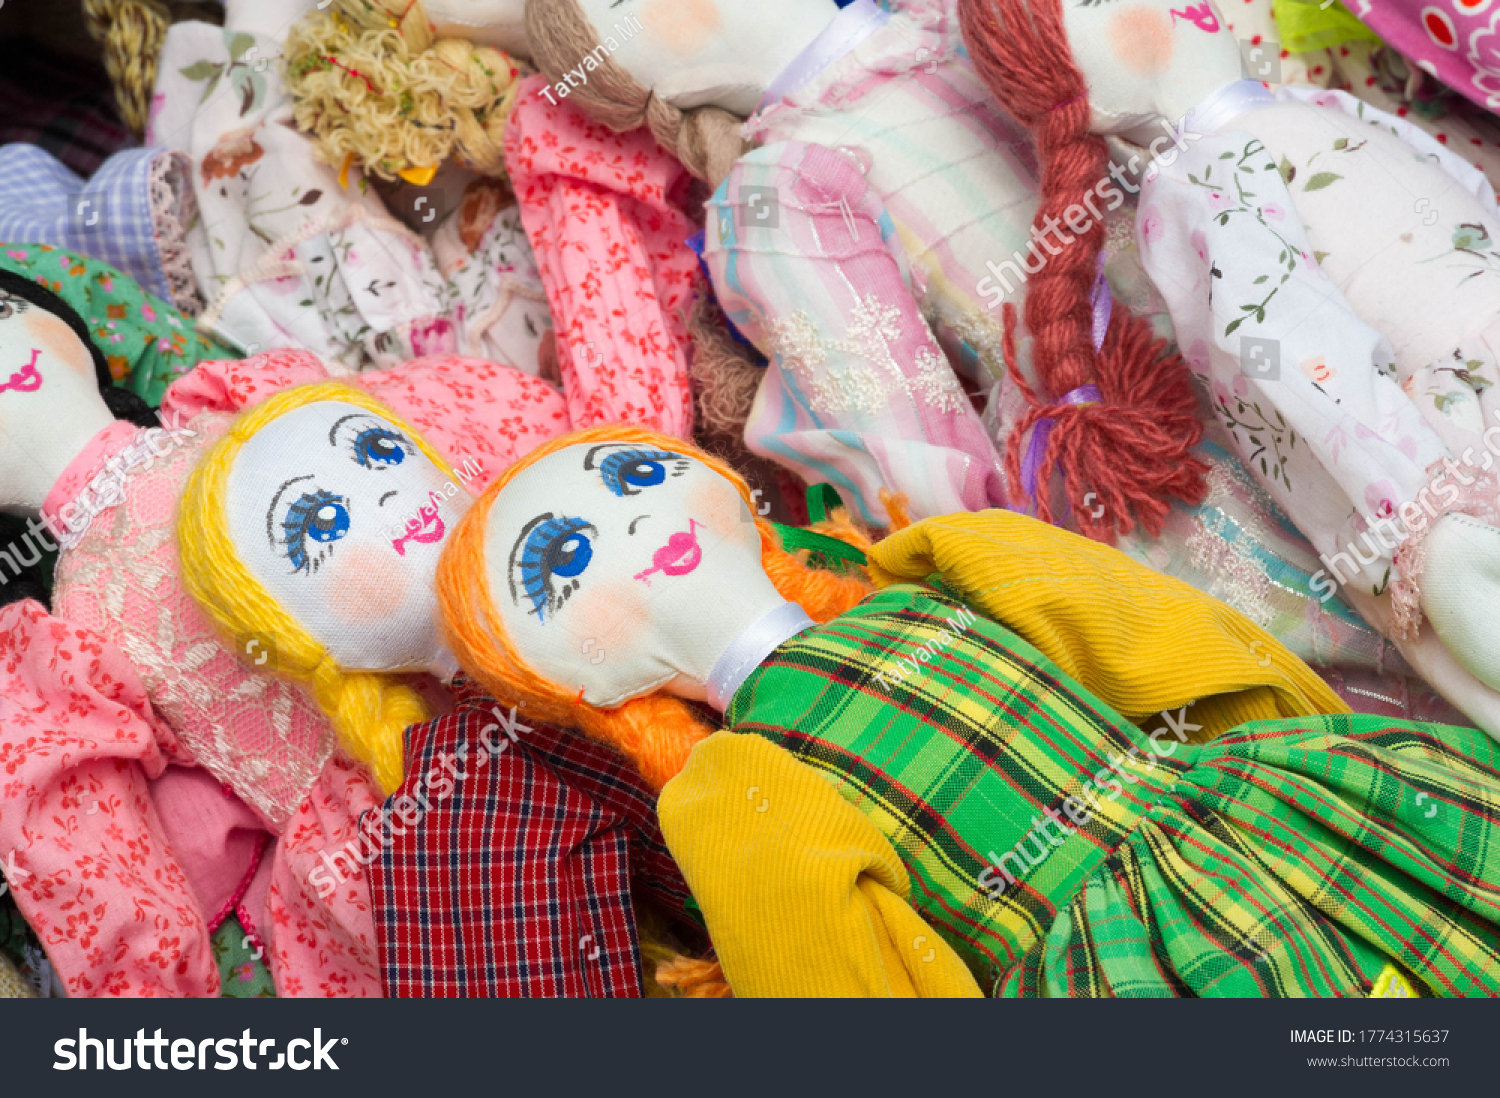 Flea market,  folk crafts. Handmade rag dolls. A rag doll is a children's toy. It is a cloth figure, a doll traditionally home-made from (and stuffed with) spare scraps of material. #1774315637